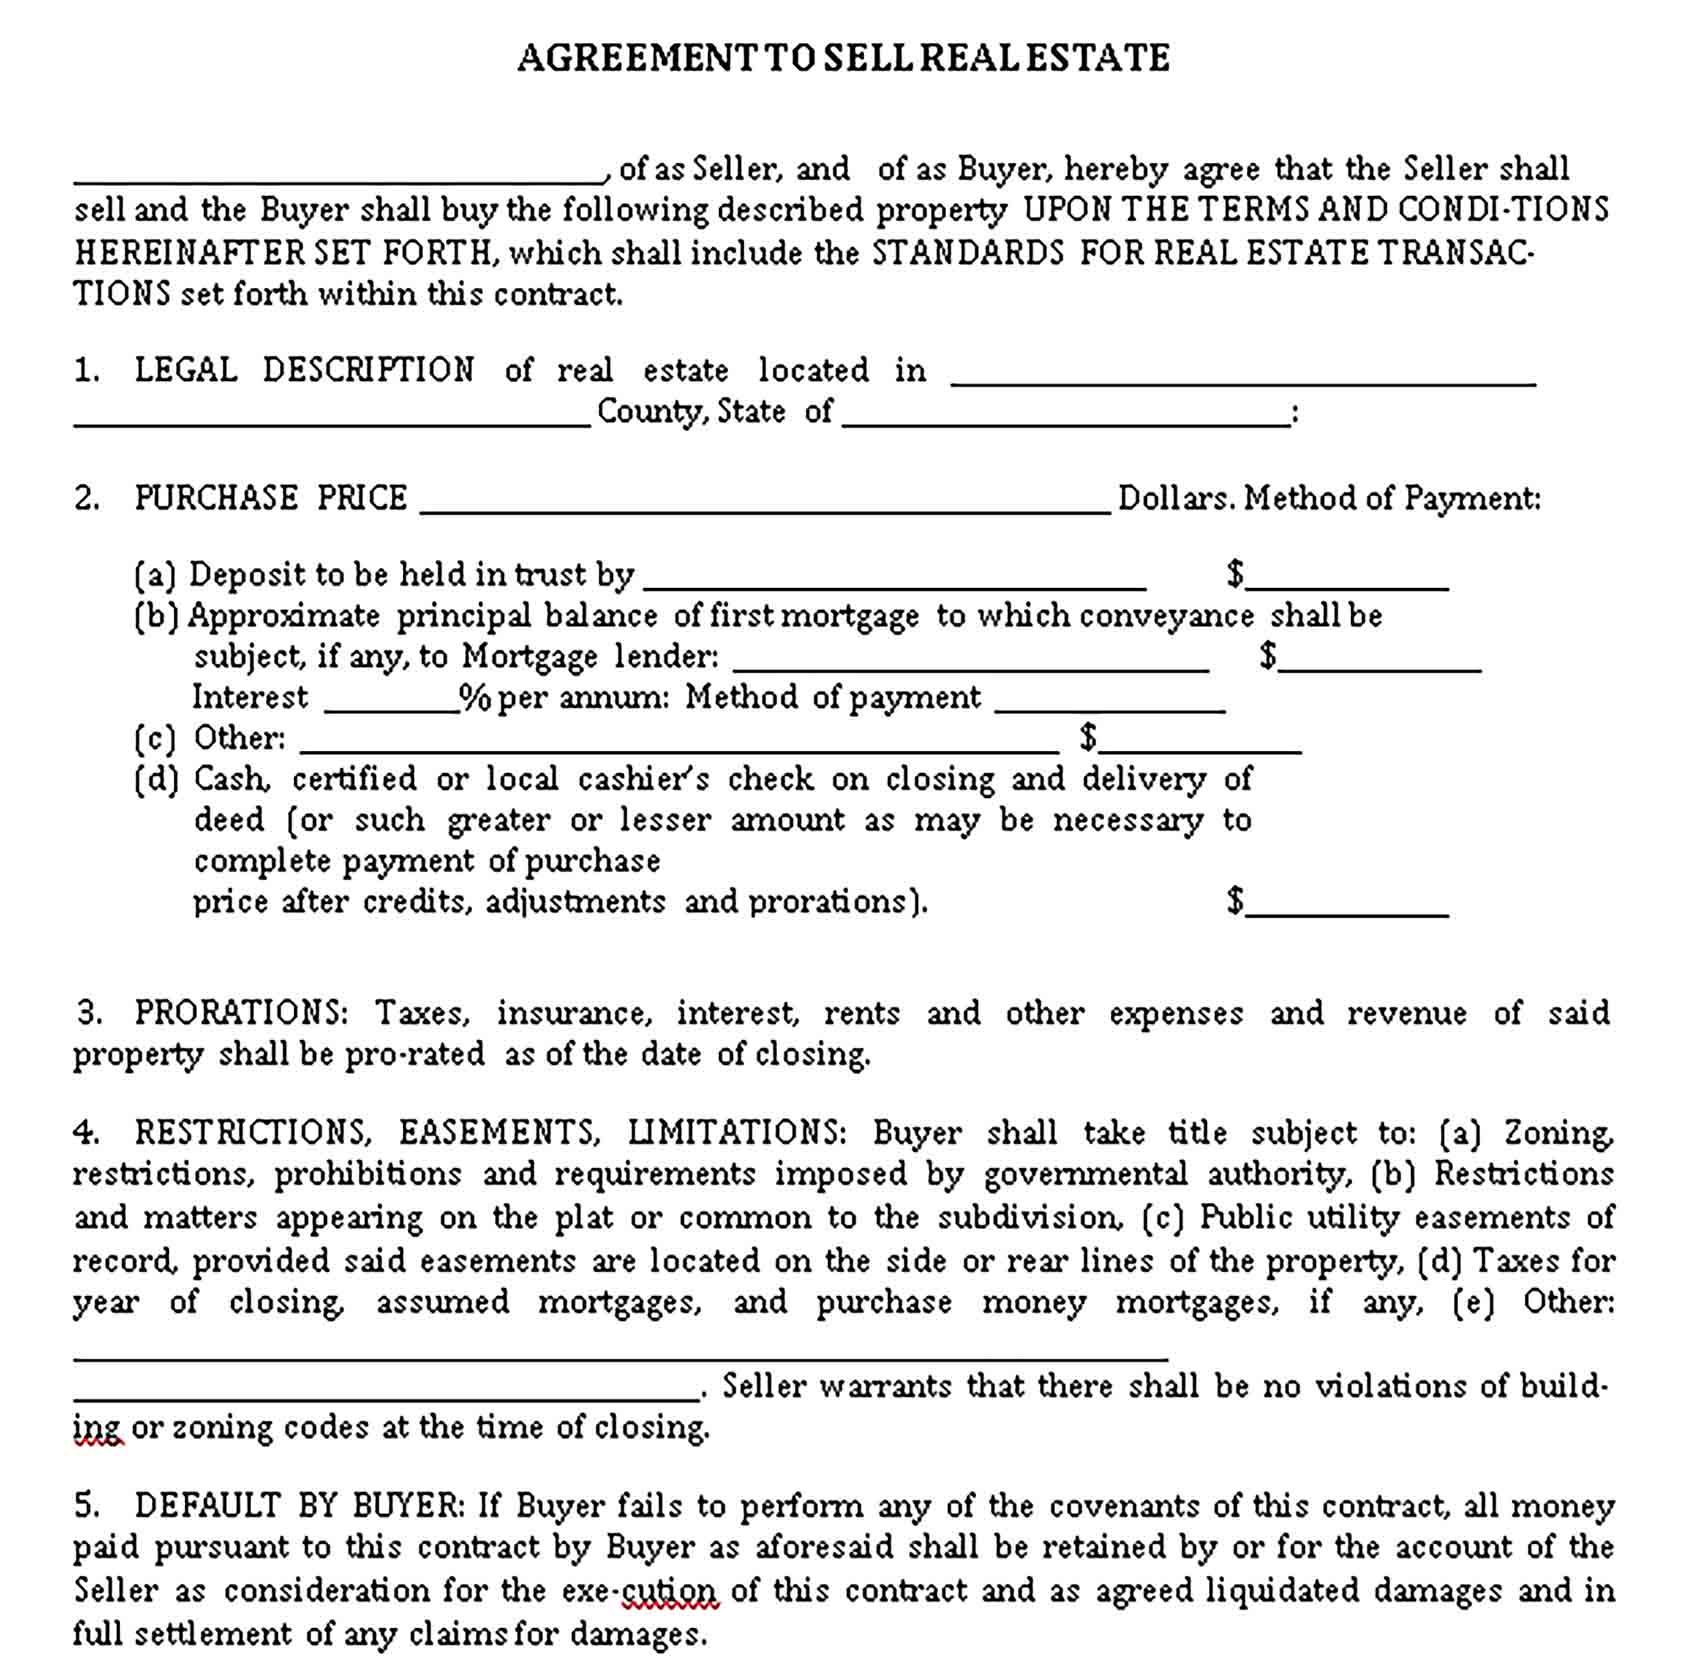 Templates Agreement to Sell Real Estate Sample